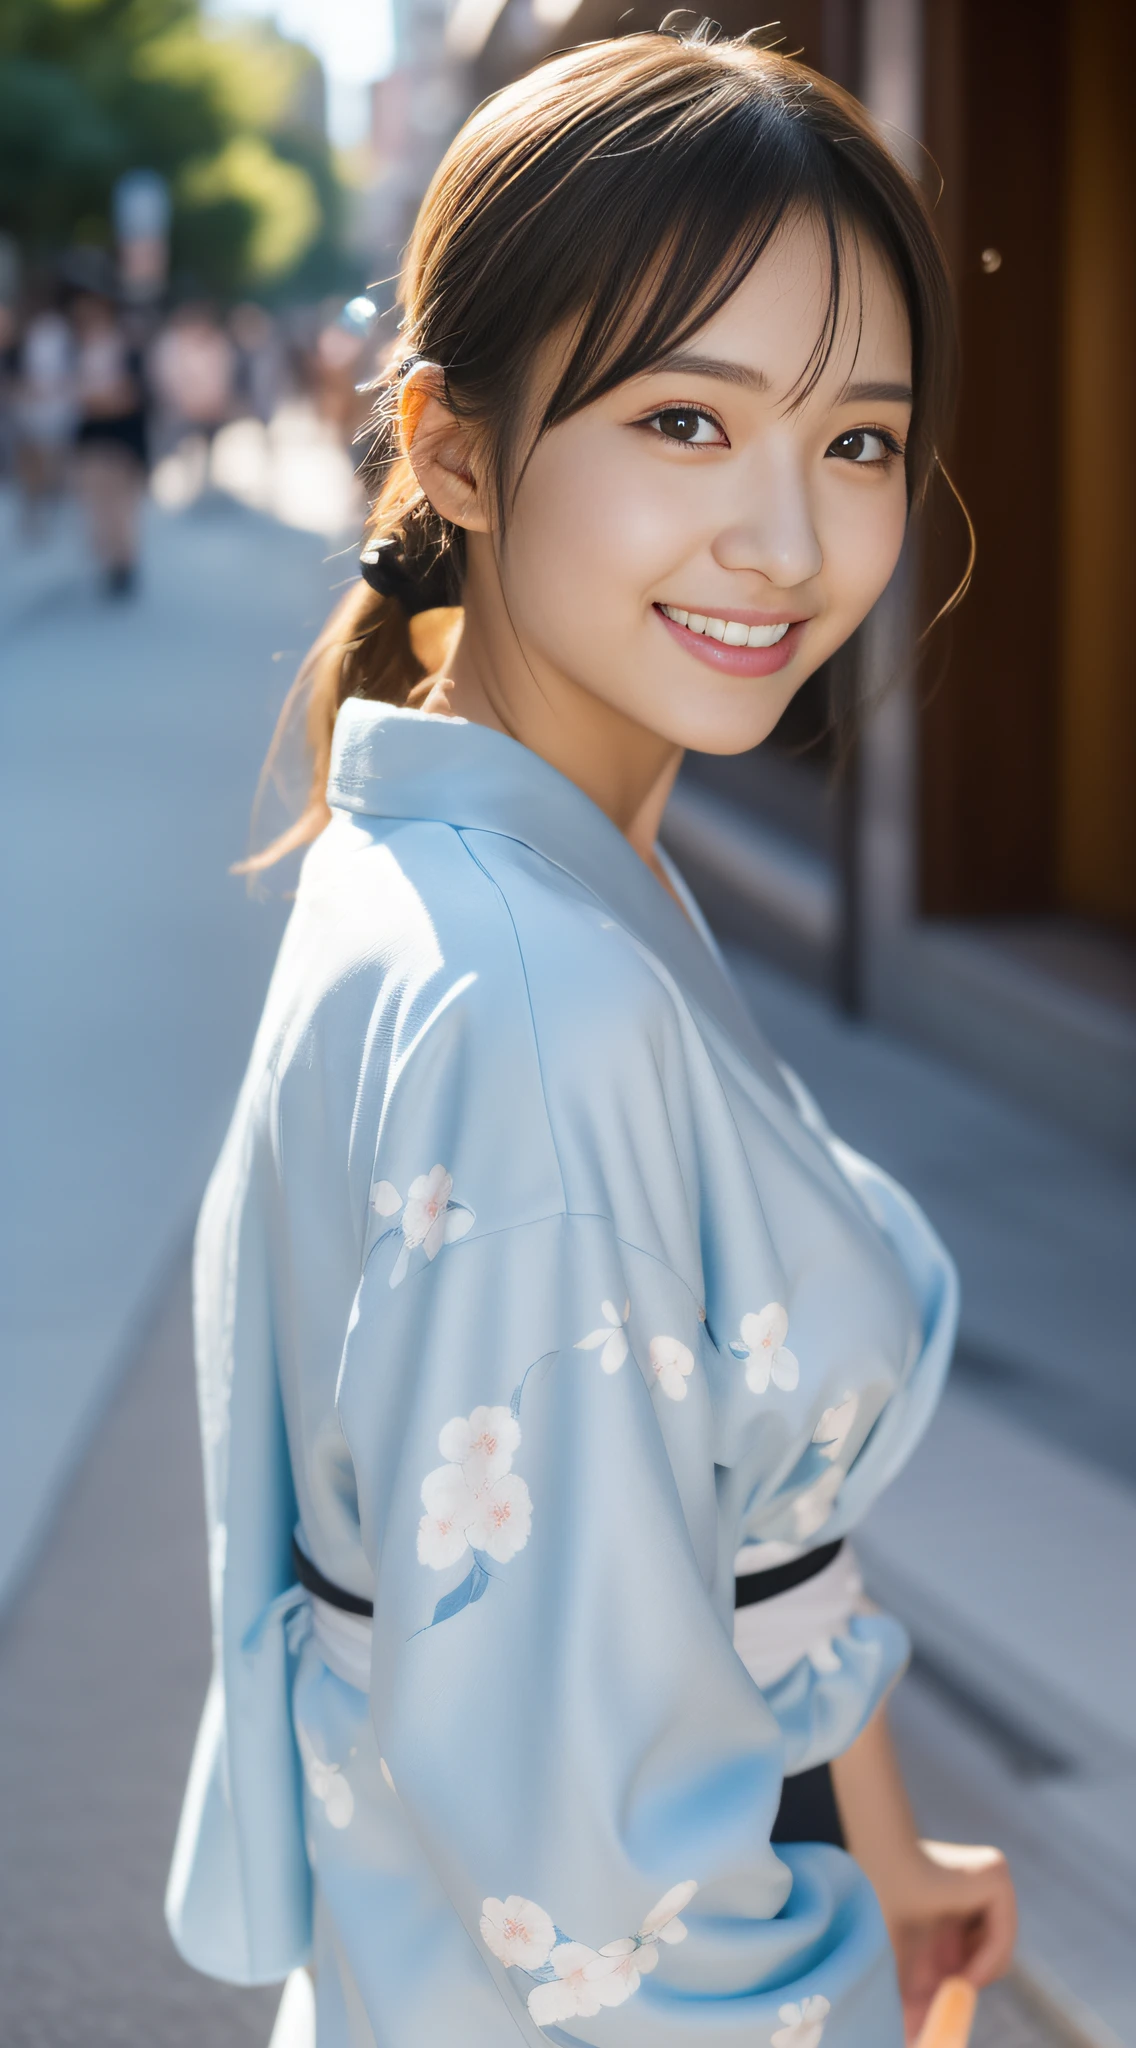 ((beste-Qualit))、((The ultra -The high-definition))finely detail、(((Beautiful One Girl)))、very detailed eyes and faces、Yukata with a light floral pattern、In the street、poneyTail、A slight smile